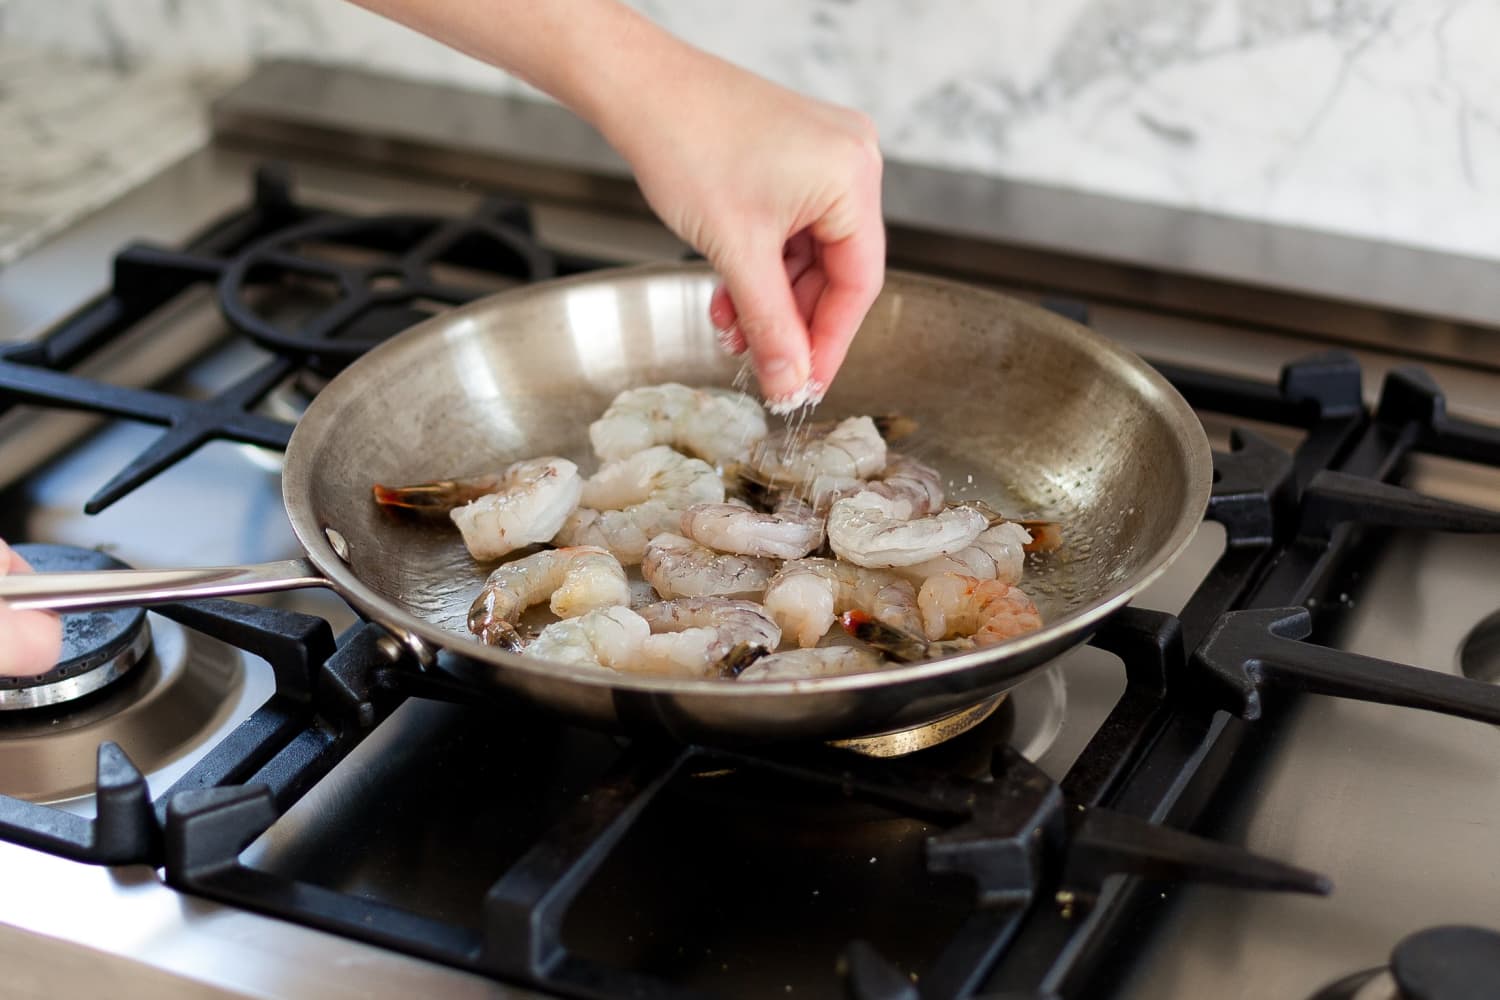 Why Is All-Clad Cookware So Expensive?